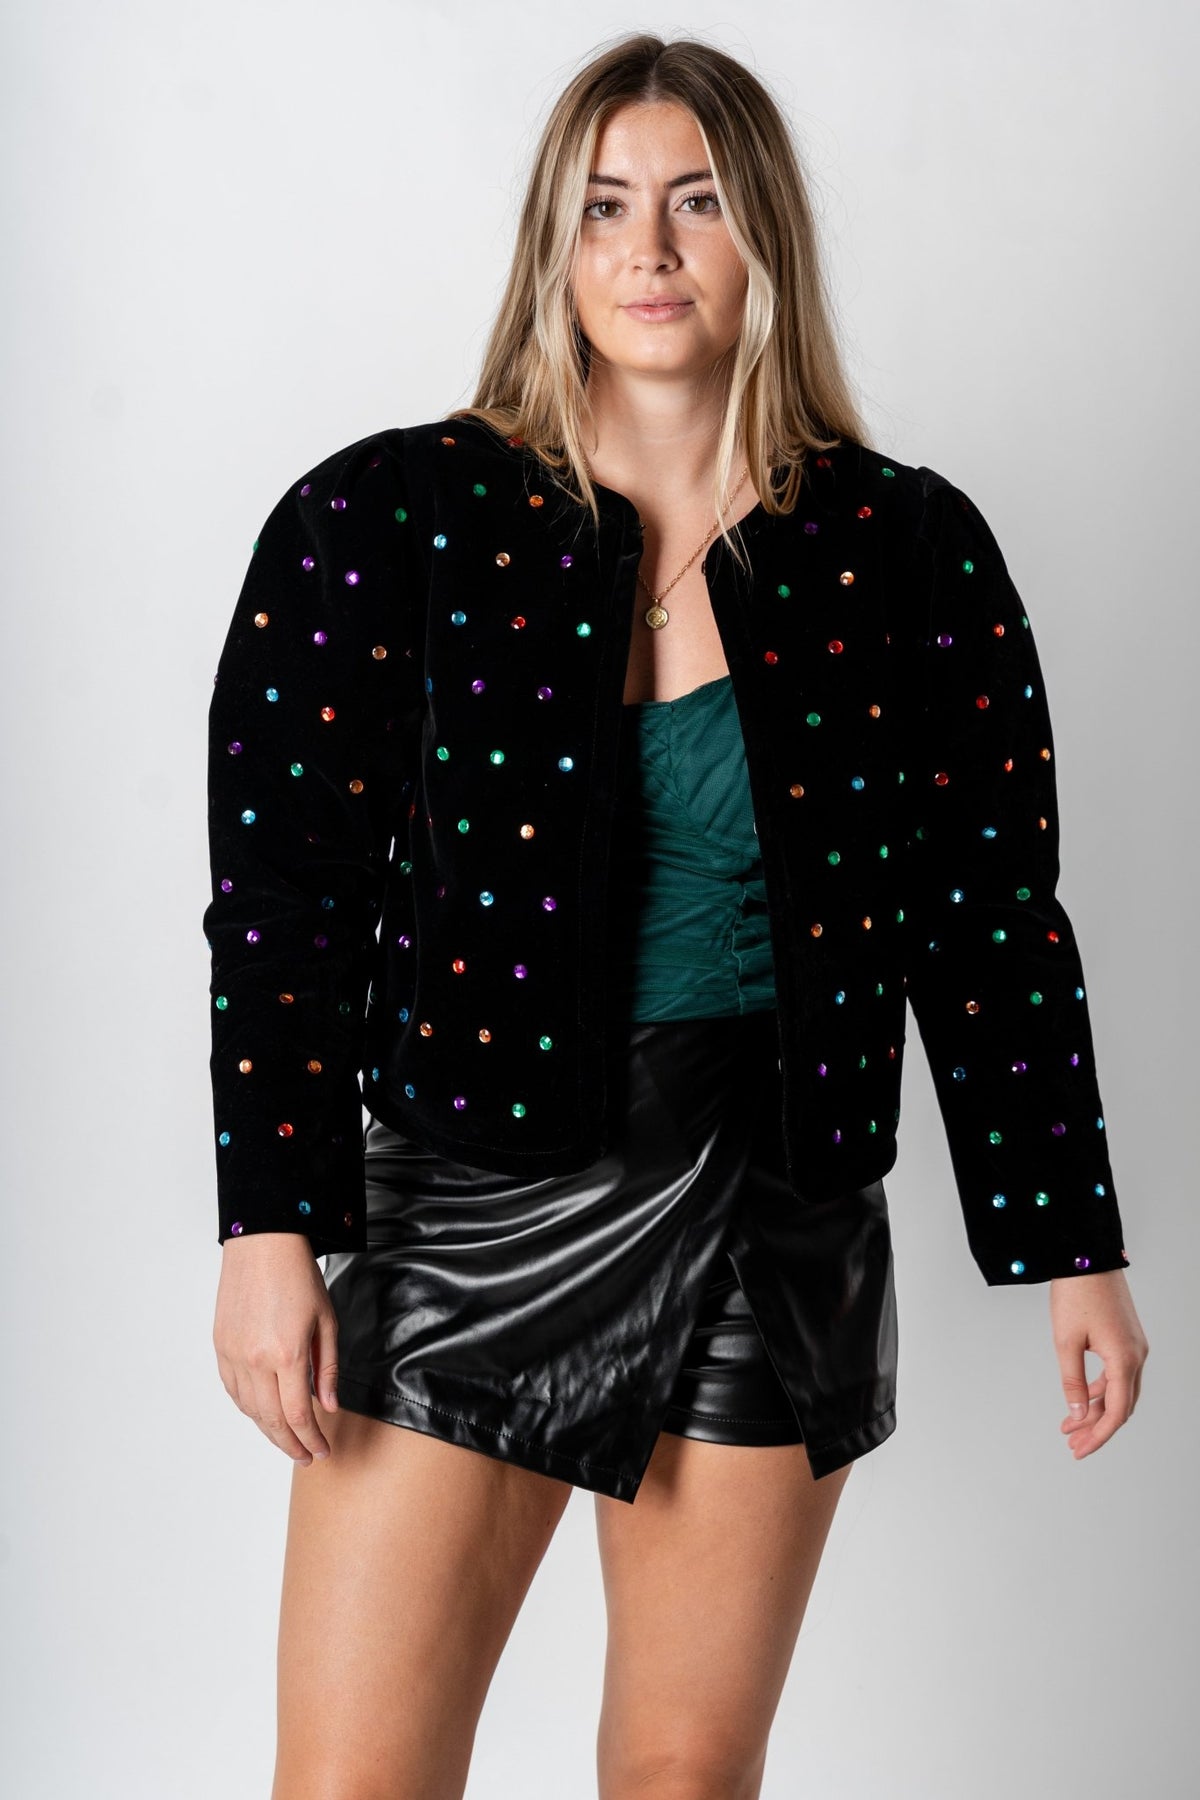 Velvet bejeweled crop jacket black – Trendy Jackets | Cute Fashion Blazers at Lush Fashion Lounge Boutique in Oklahoma City